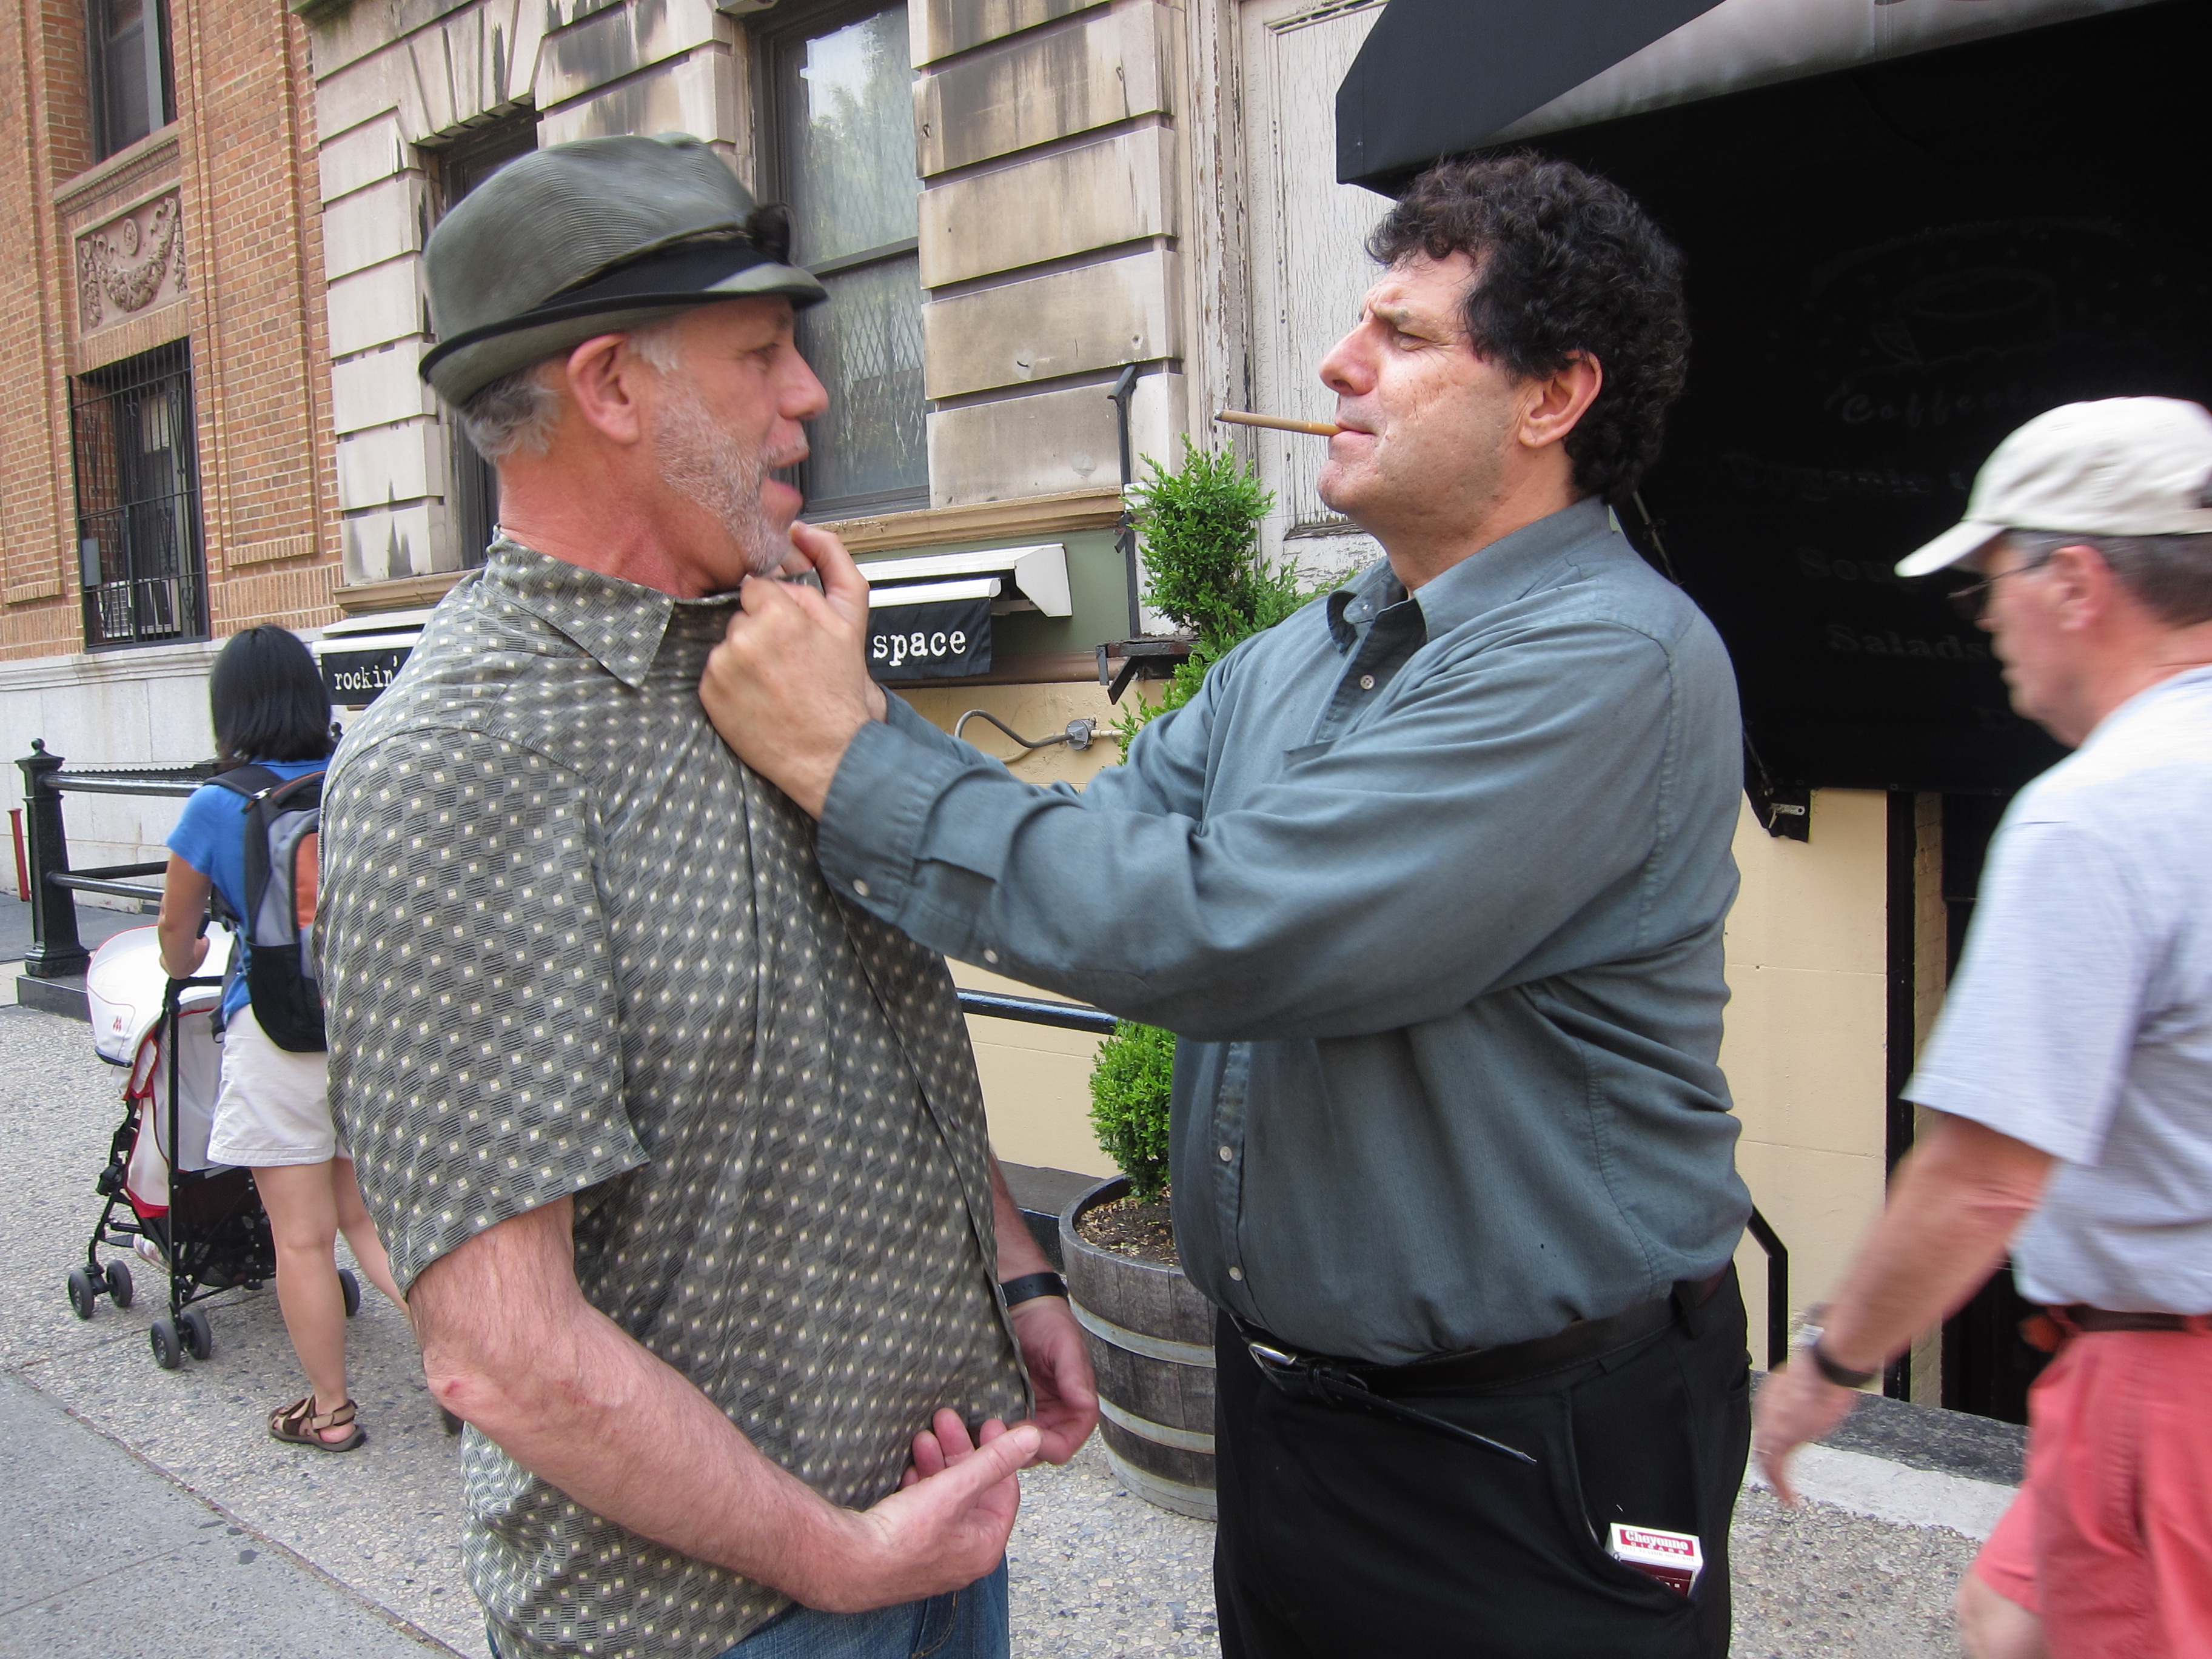 Al Burgo (Searching for Bobby D, Trust Me, The Last Gamble) and Rich Rossi on the set of Night Bird